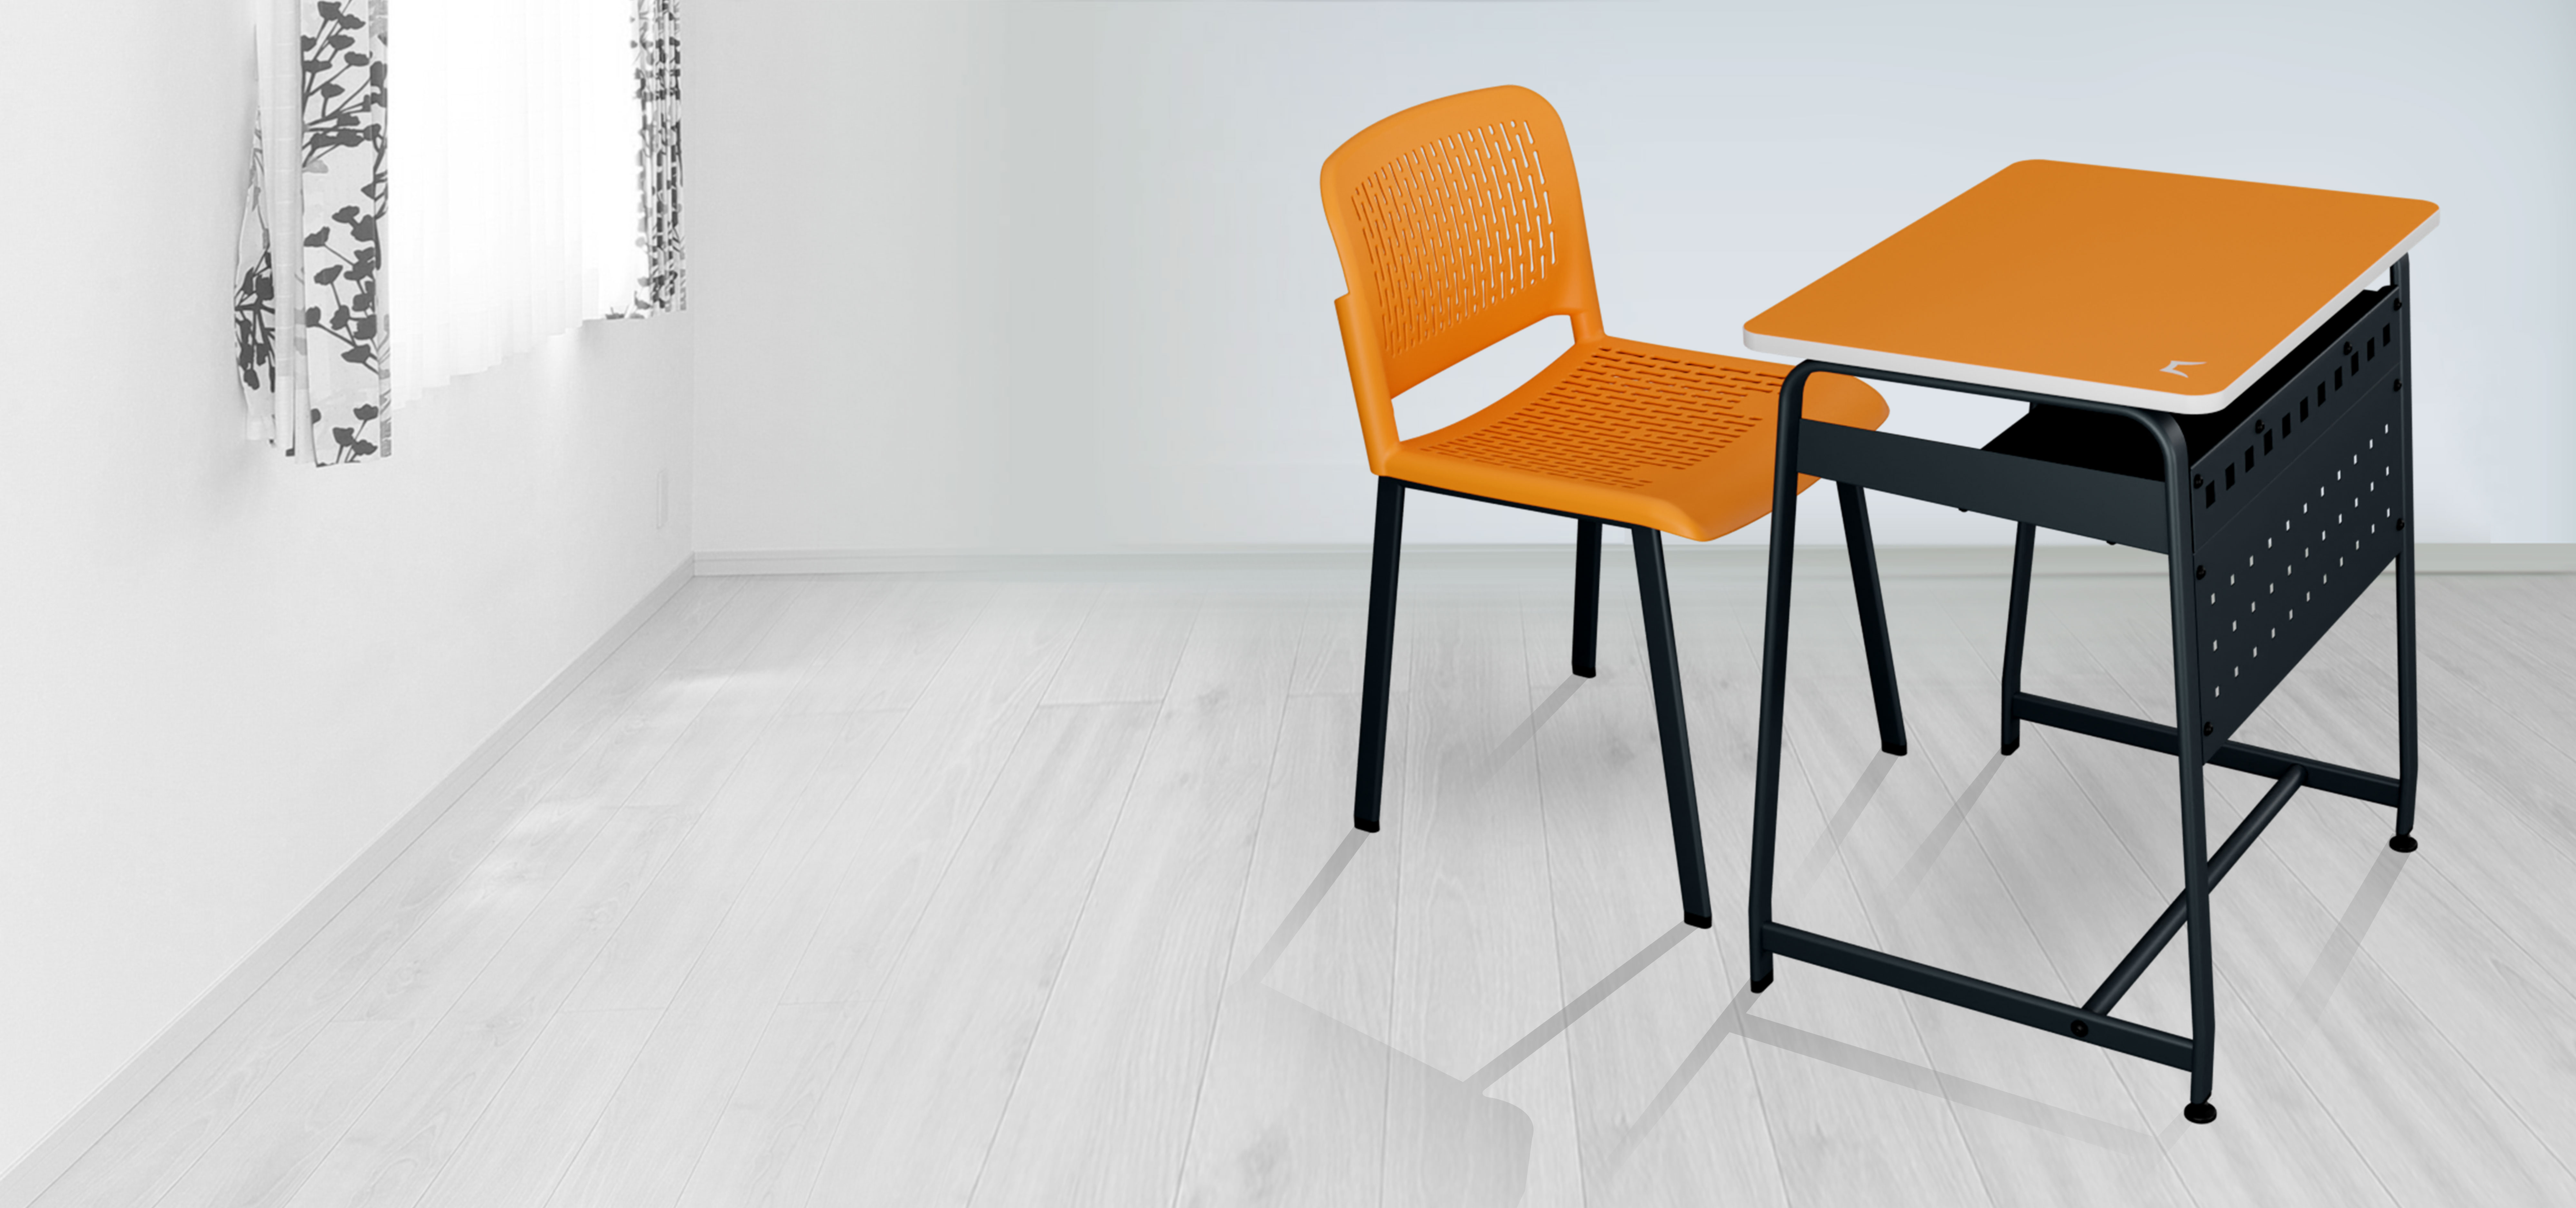 Eris Type B Classroom Chairs Manufacturer in India